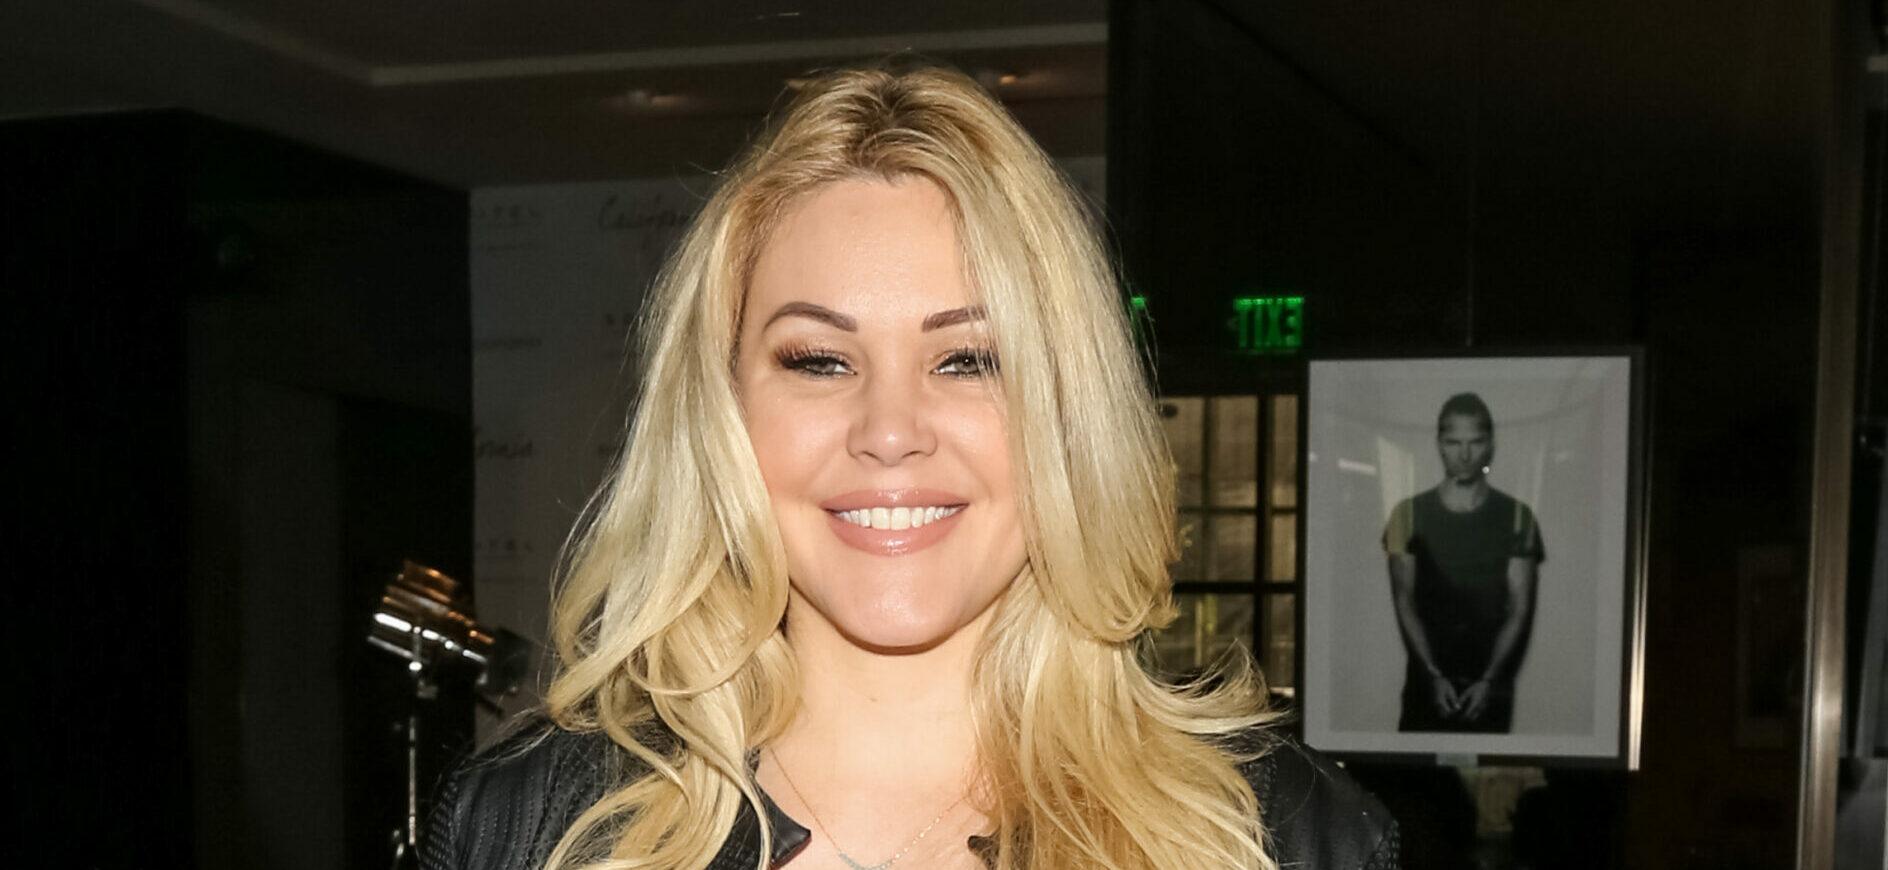 Shanna Moakler Details Experience With Booty Cream Gone Wrong: ‘So Uncomfortable’